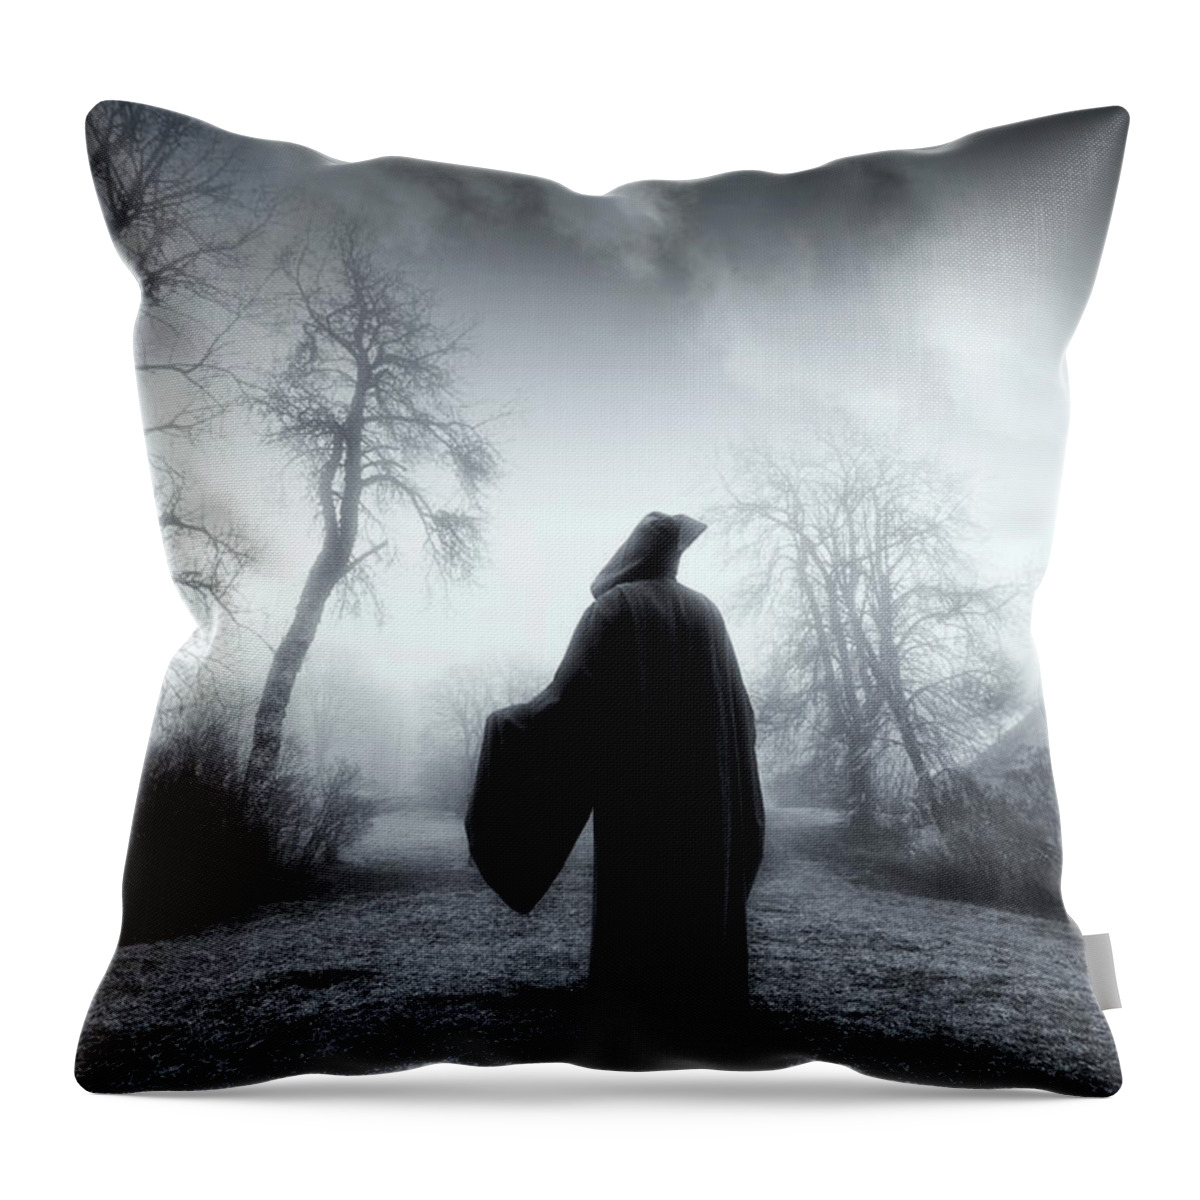 Reaper Throw Pillow featuring the photograph The Reaper Moving Through Mist And Fog by Christian Lagereek